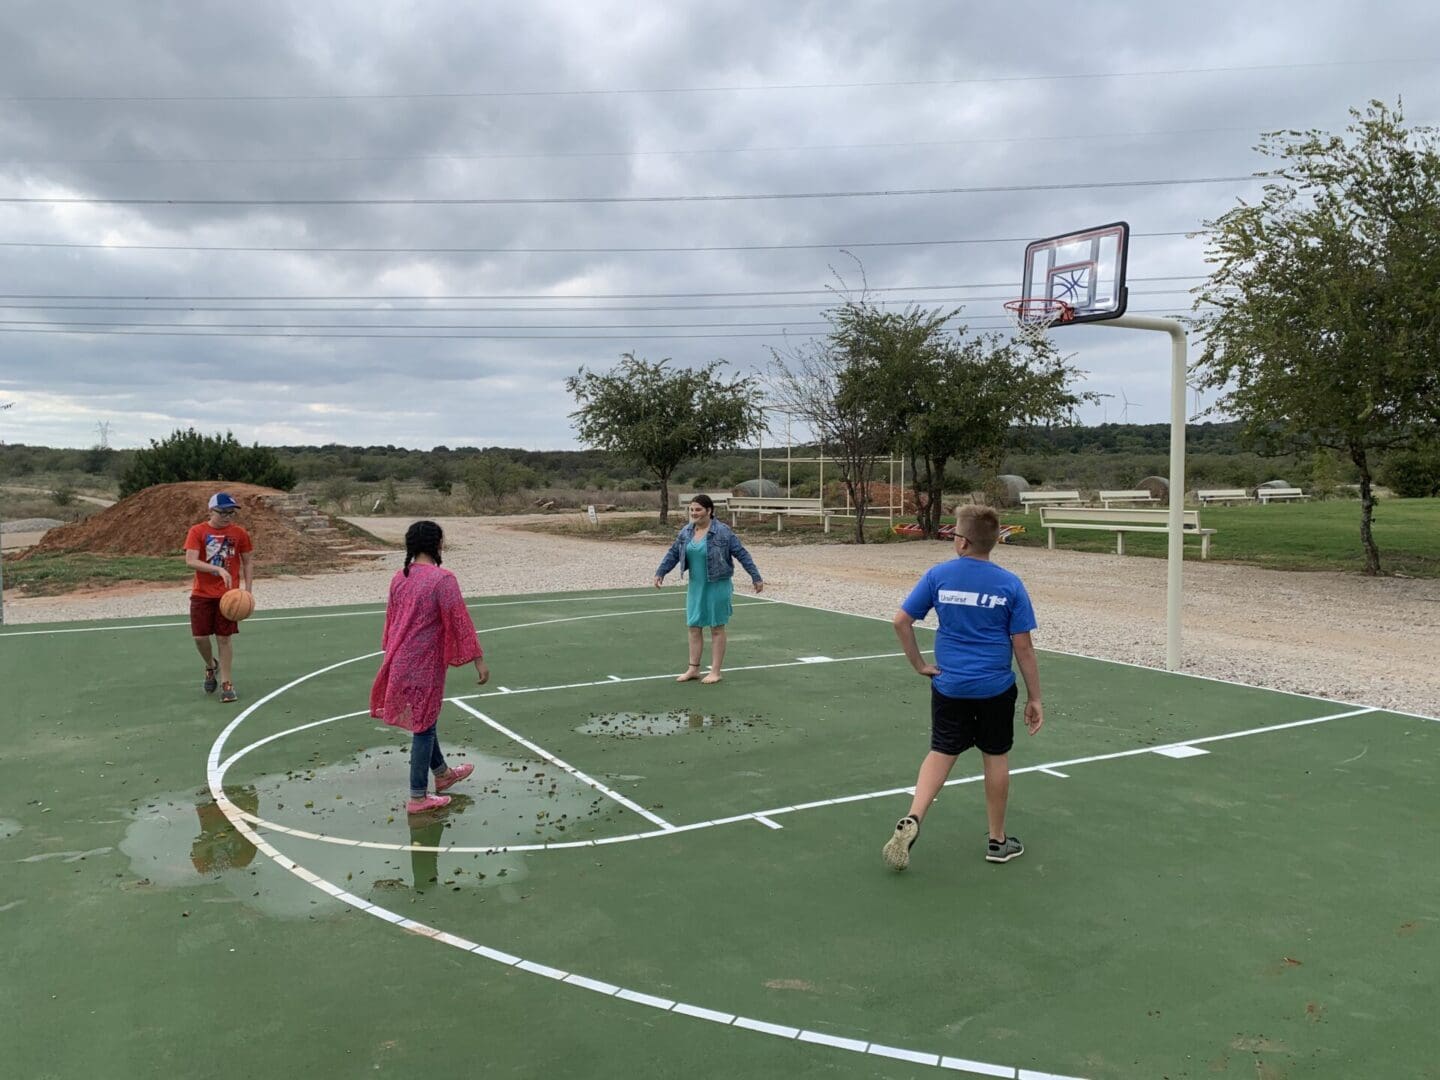 A group of people playing basketball on an outdoor court.